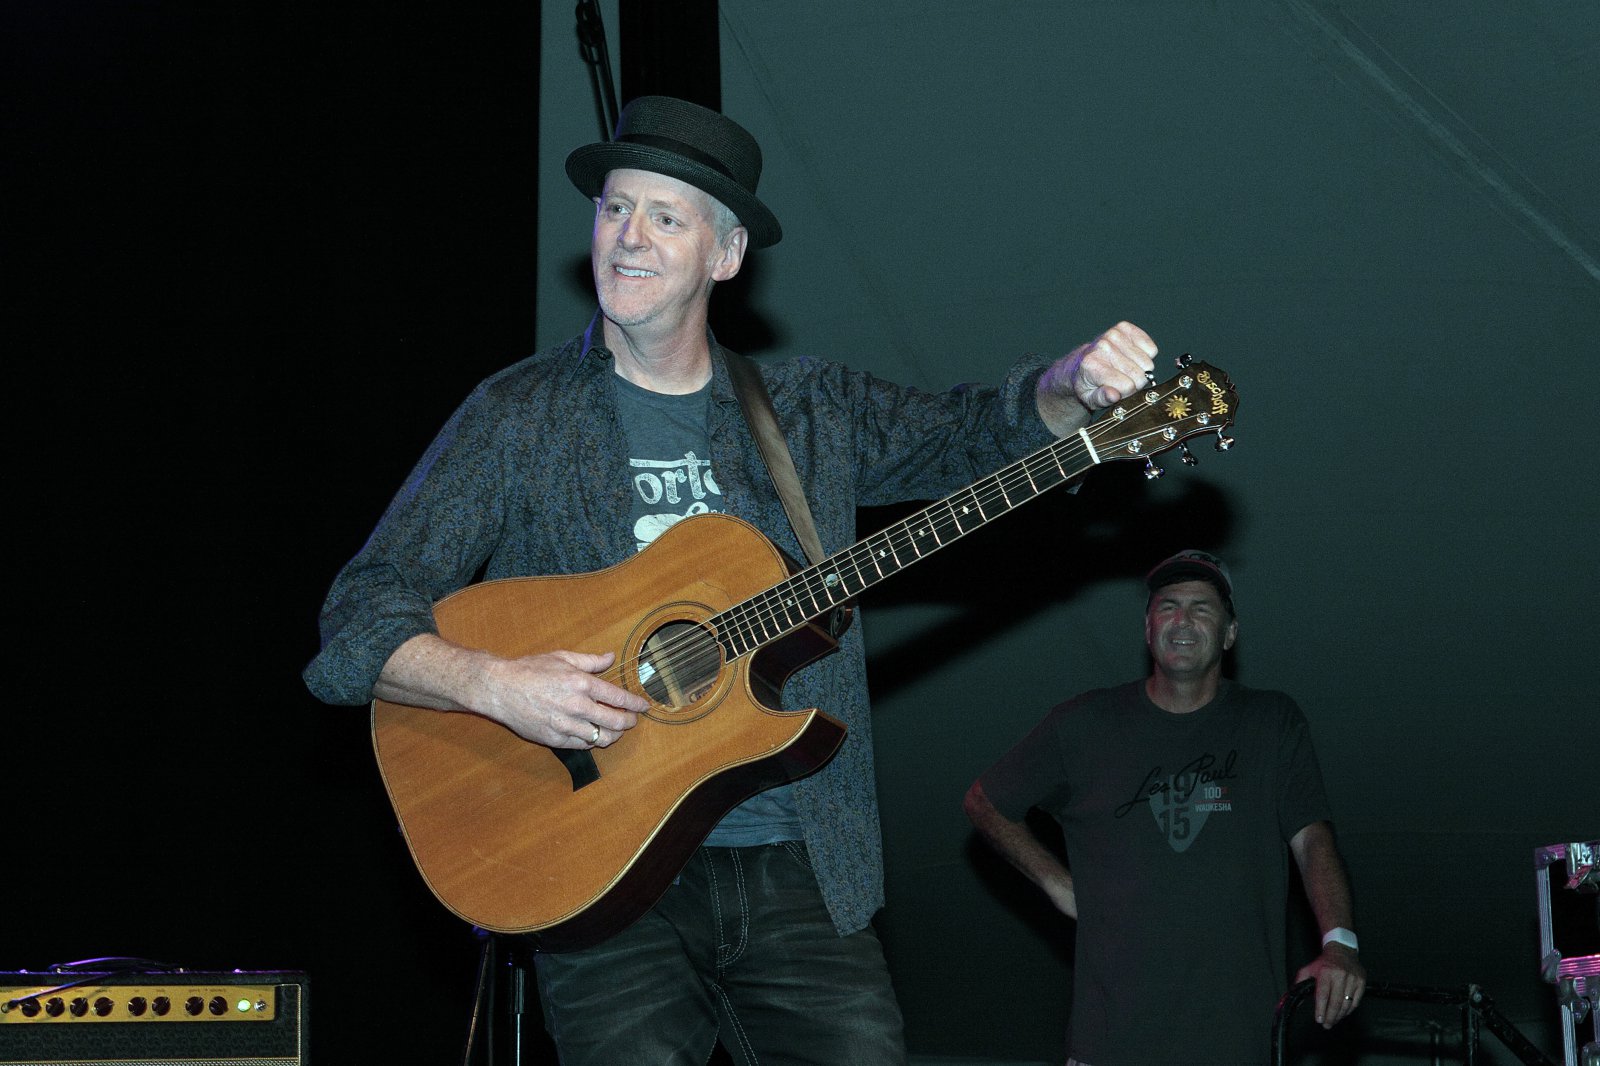 Willy Porter, performing at the Les Paul 100th Anniversary commemorative concert in Waukesha.WI., pg.42. Photo by Erol Reyal.